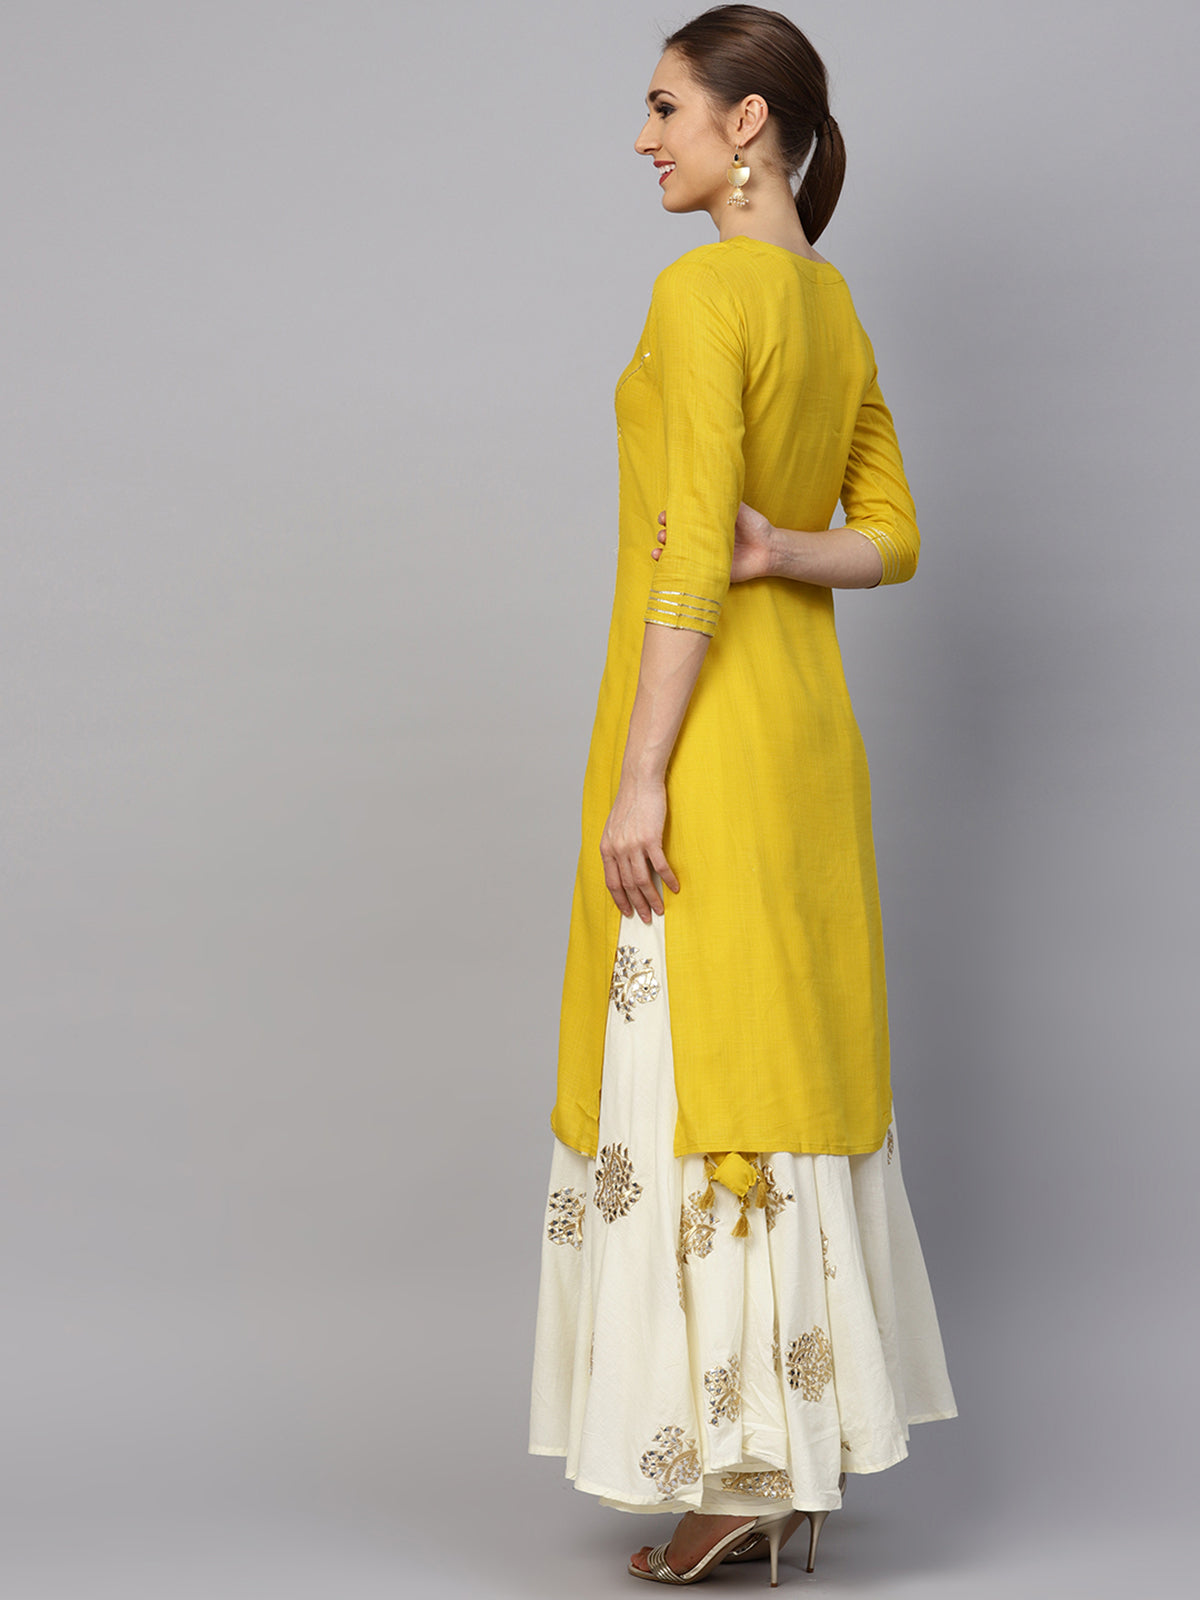 Ishin Women's Rayon Yellow & Off White Solid A-Line Kurta With Embellished Skirt